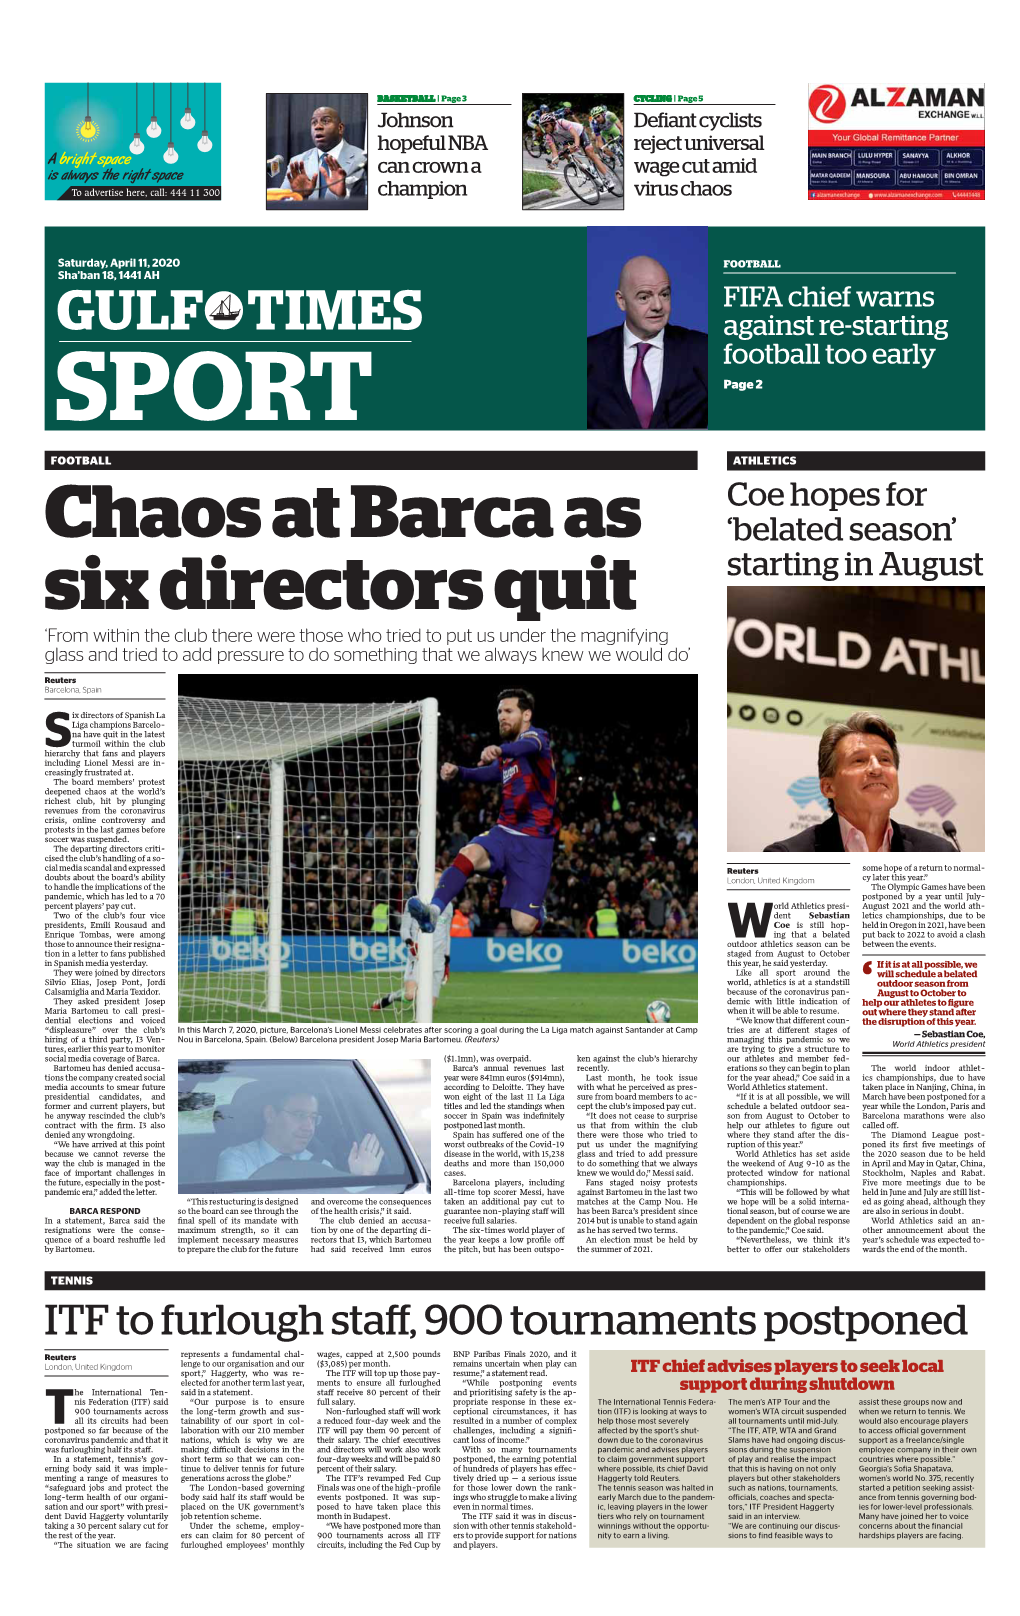 FIFA Chief Warns GULF TIMES Against Re-Starting Football Too Early SPORT Page 2